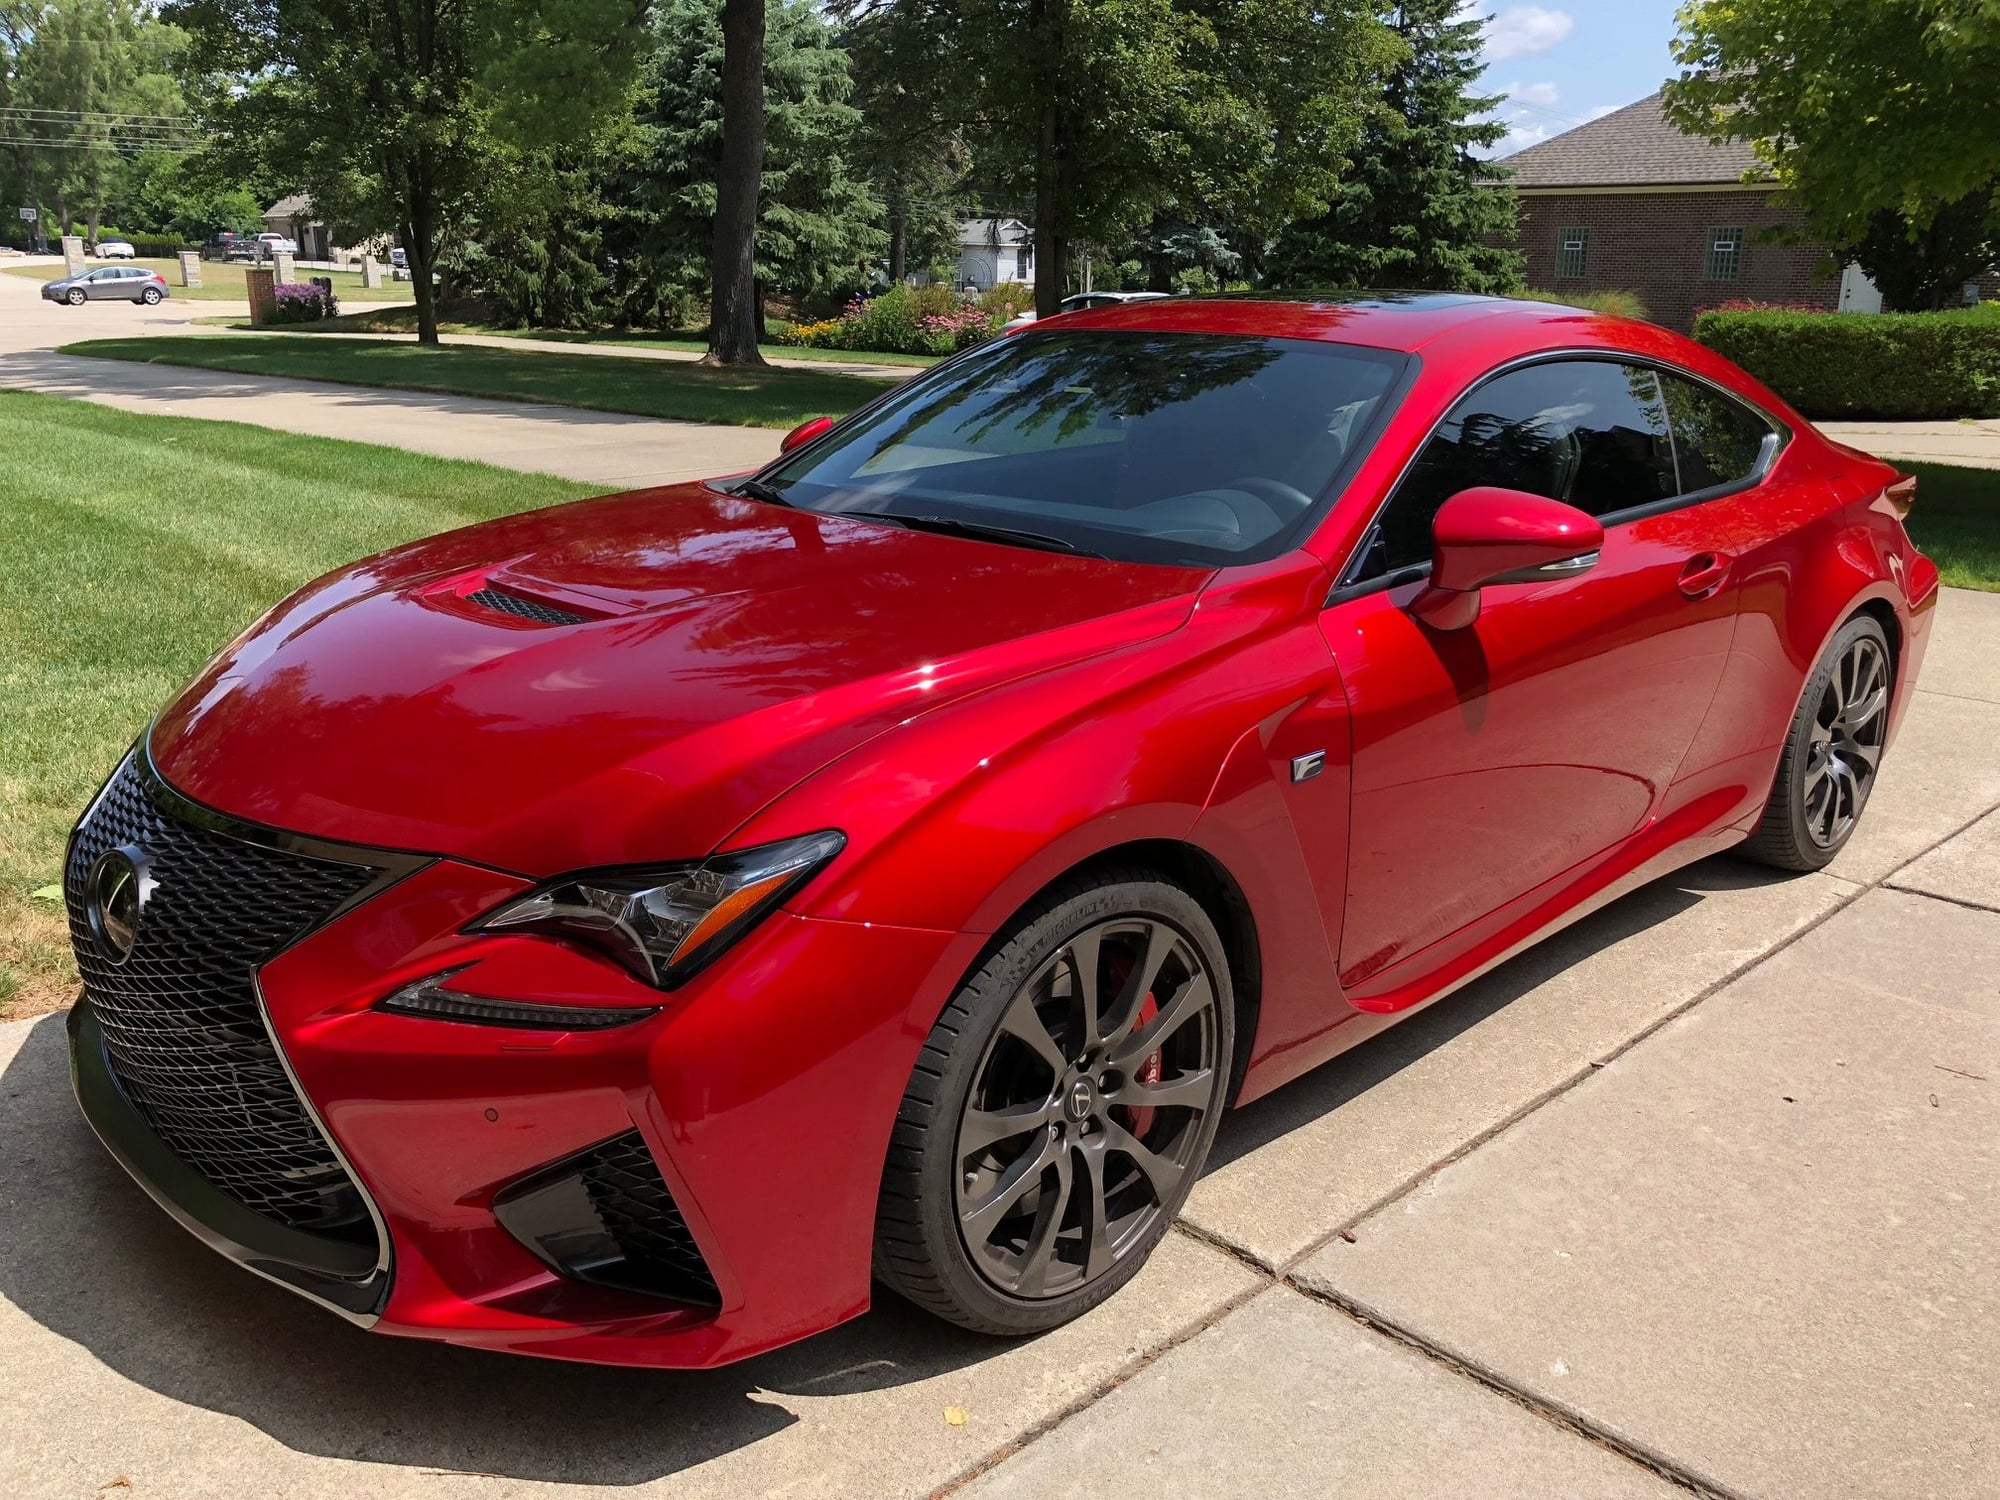 2015 Lexus RC F - 2015 Lexus RCF - Used - VIN JTHHP5BC6F5000789 - 11,700 Miles - 8 cyl - 2WD - Automatic - Coupe - Red - Troy, MI 48085, United States